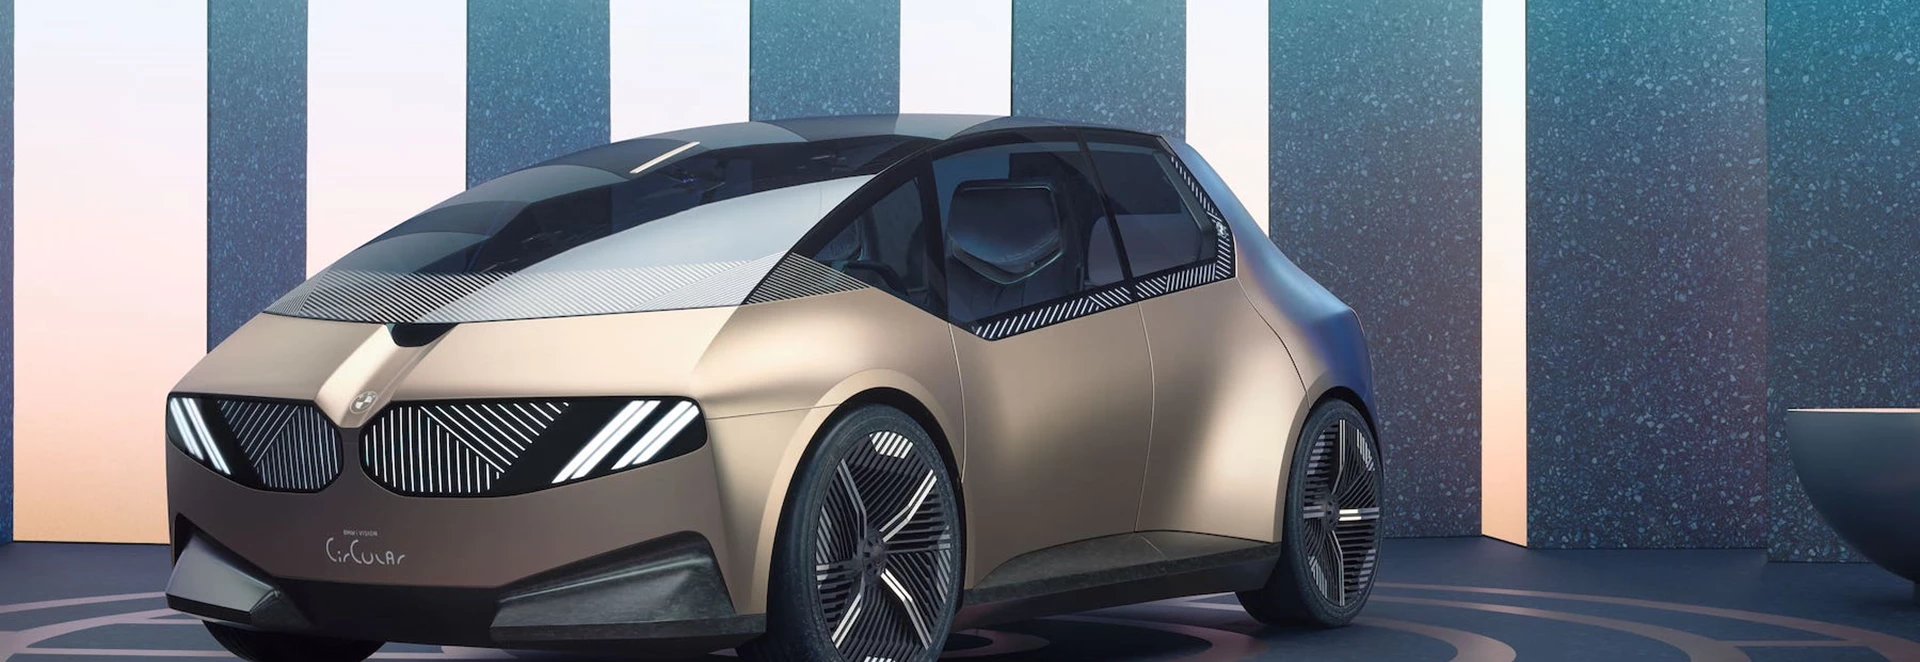 BMW’s i Vision Circular is a car with recycling in mind 